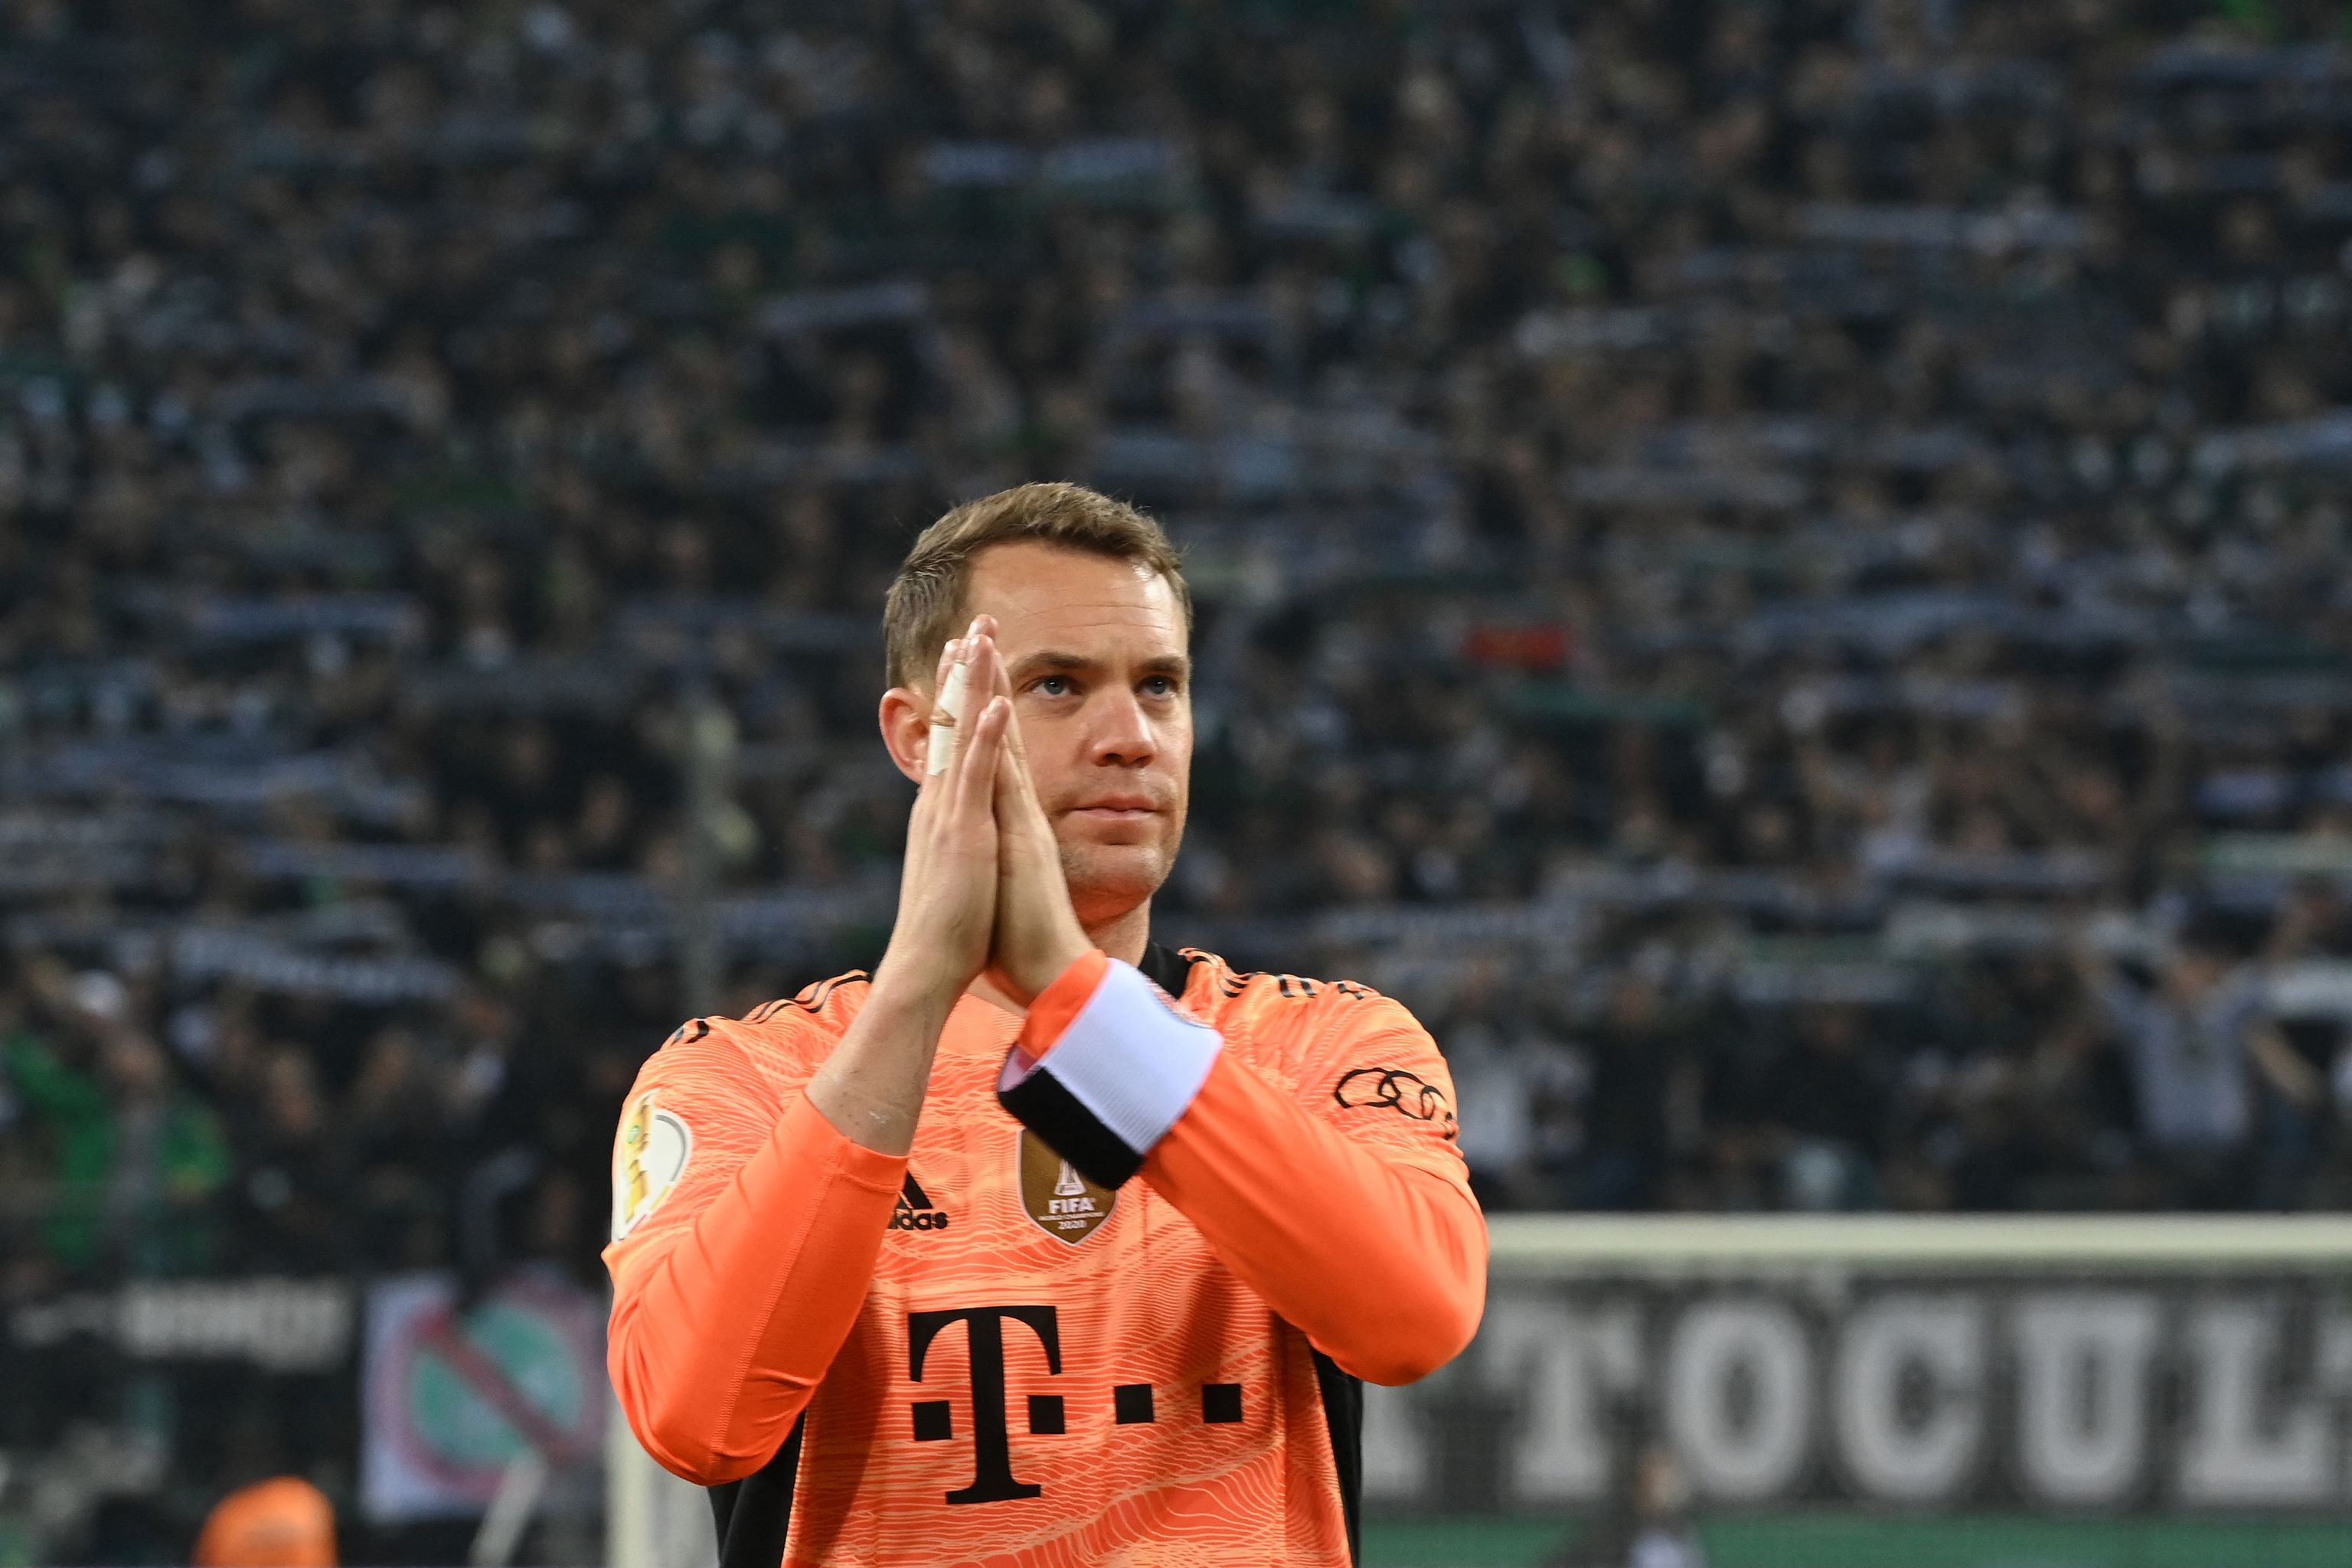 lt;HIT gt;Bayern lt;/HIT gt; Munich's German goalkeeper Manuel Neuer applauds after the German Cup (DFB Pokal) 2nd round football match Borussia Moenchengladbach v FC lt;HIT gt;Bayern lt;/HIT gt; Munich in Moenchengladbach, Western Germany, on October 27, 2021. (Photo by Ina Fassbender / AFP) / DFL REGULATIONS PROHIBIT ANY USE OF PHOTOGRAPHS AS IMAGE SEQUENCES AND/OR QUASI-VIDEO